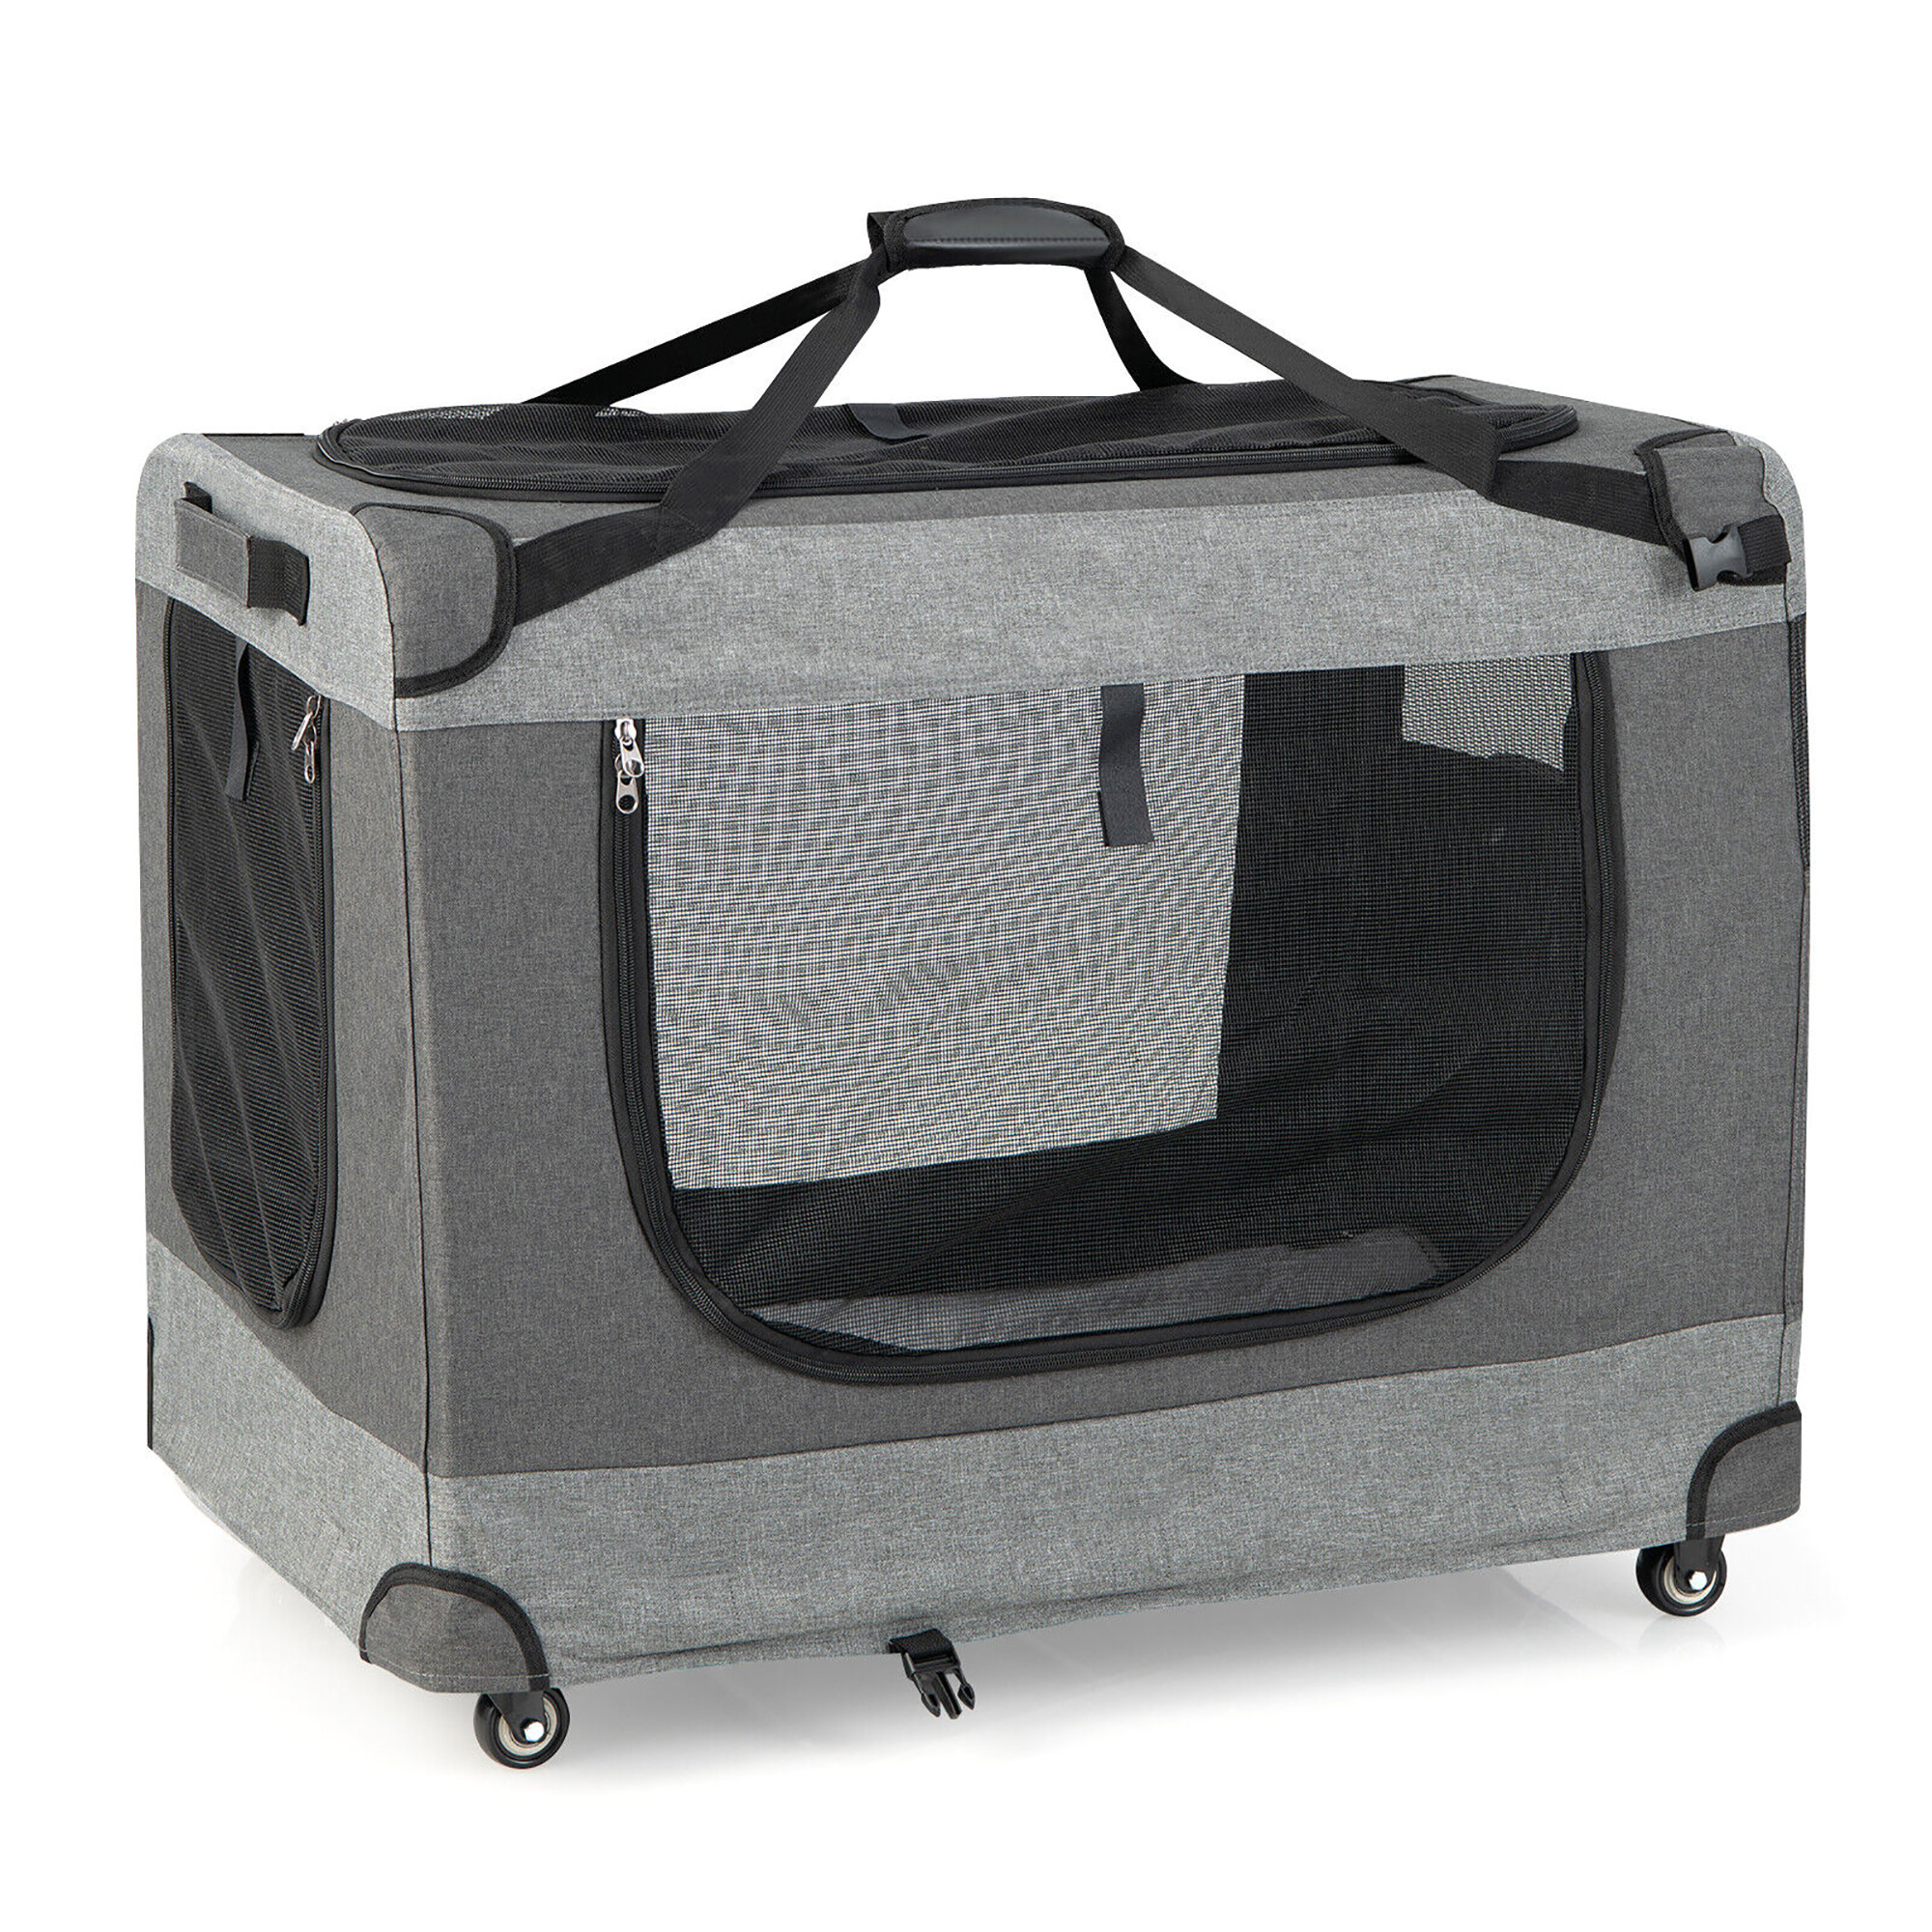 IRIS USA 19 Extra Small Pet Travel Carrier with Front and Top Access,  Black/Gray